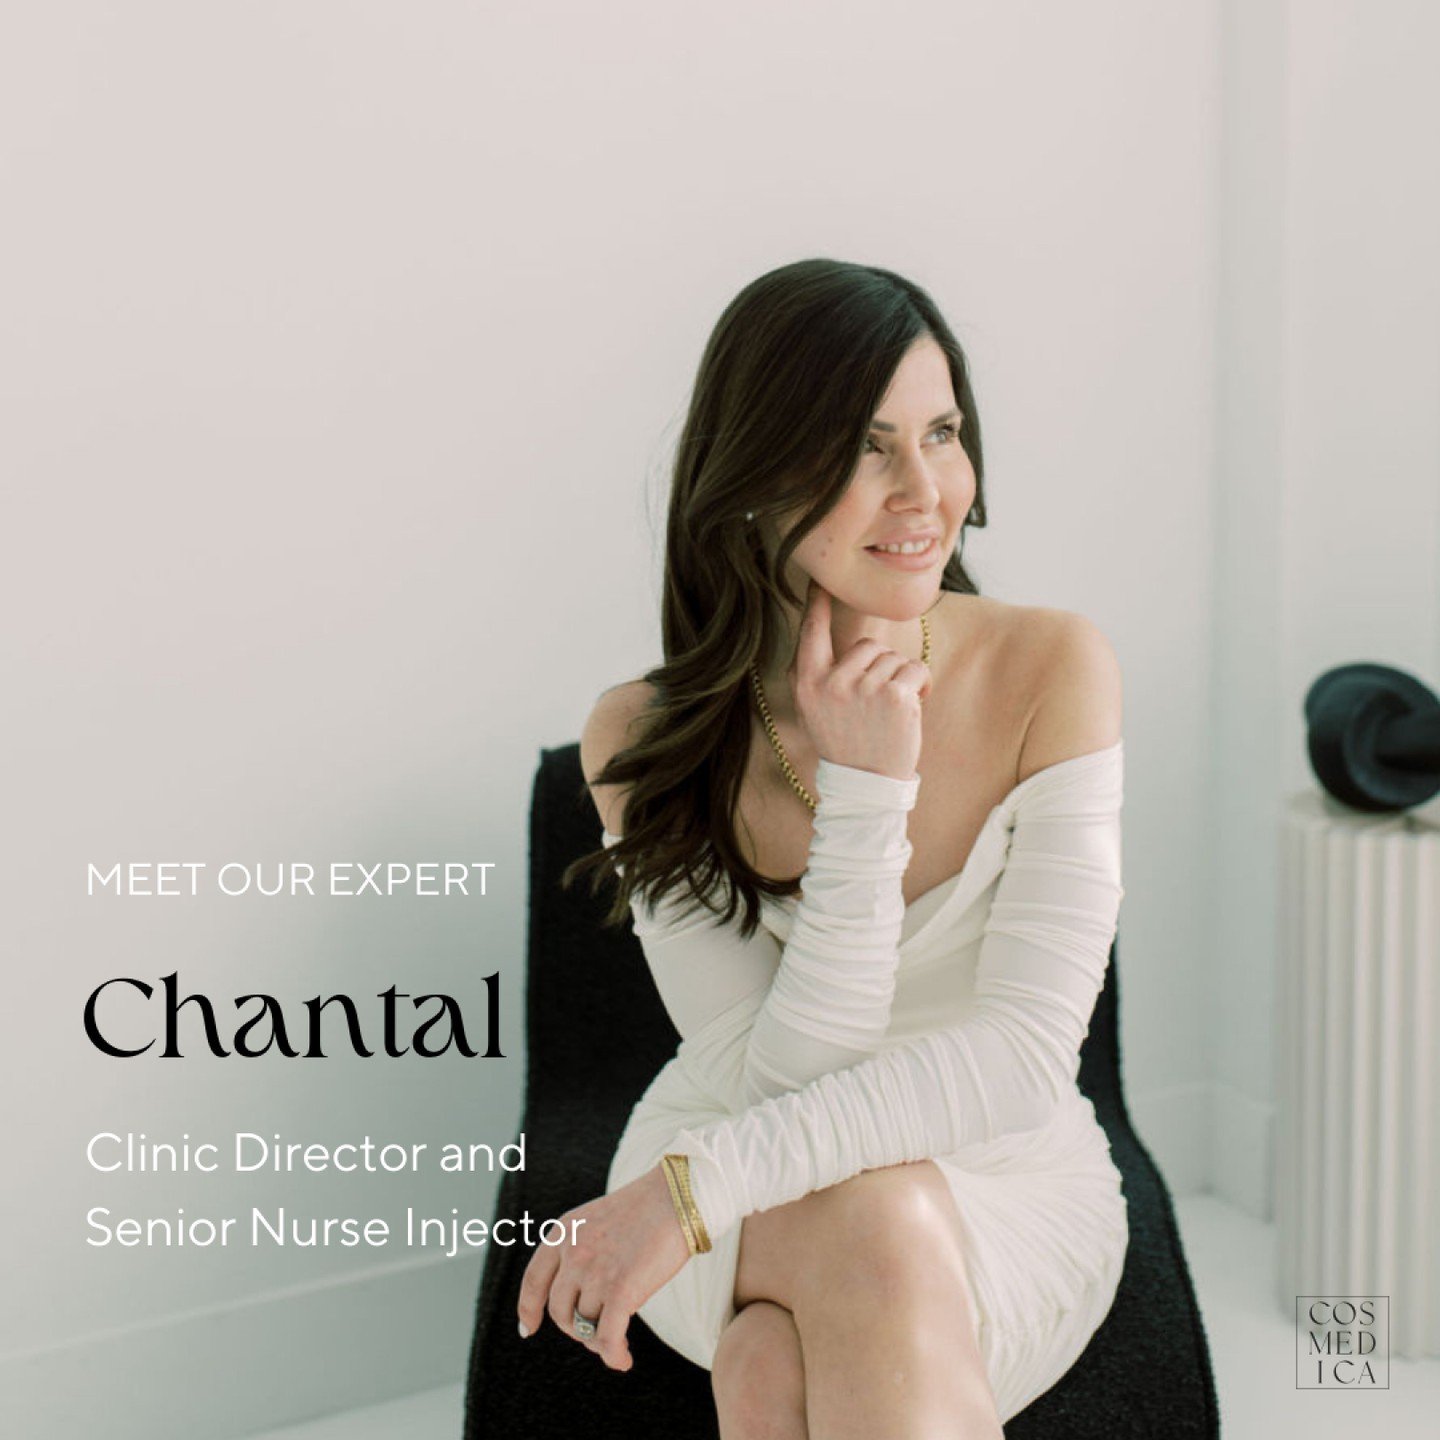 Meet Chantal ! Clinic Director and Senior Nurse Injector. 

Chantal has a unique educational background that includes Communications, Business, Medical Aesthetics and Nursing. Her profound knowledge and passion for aesthetics shines through in any cl